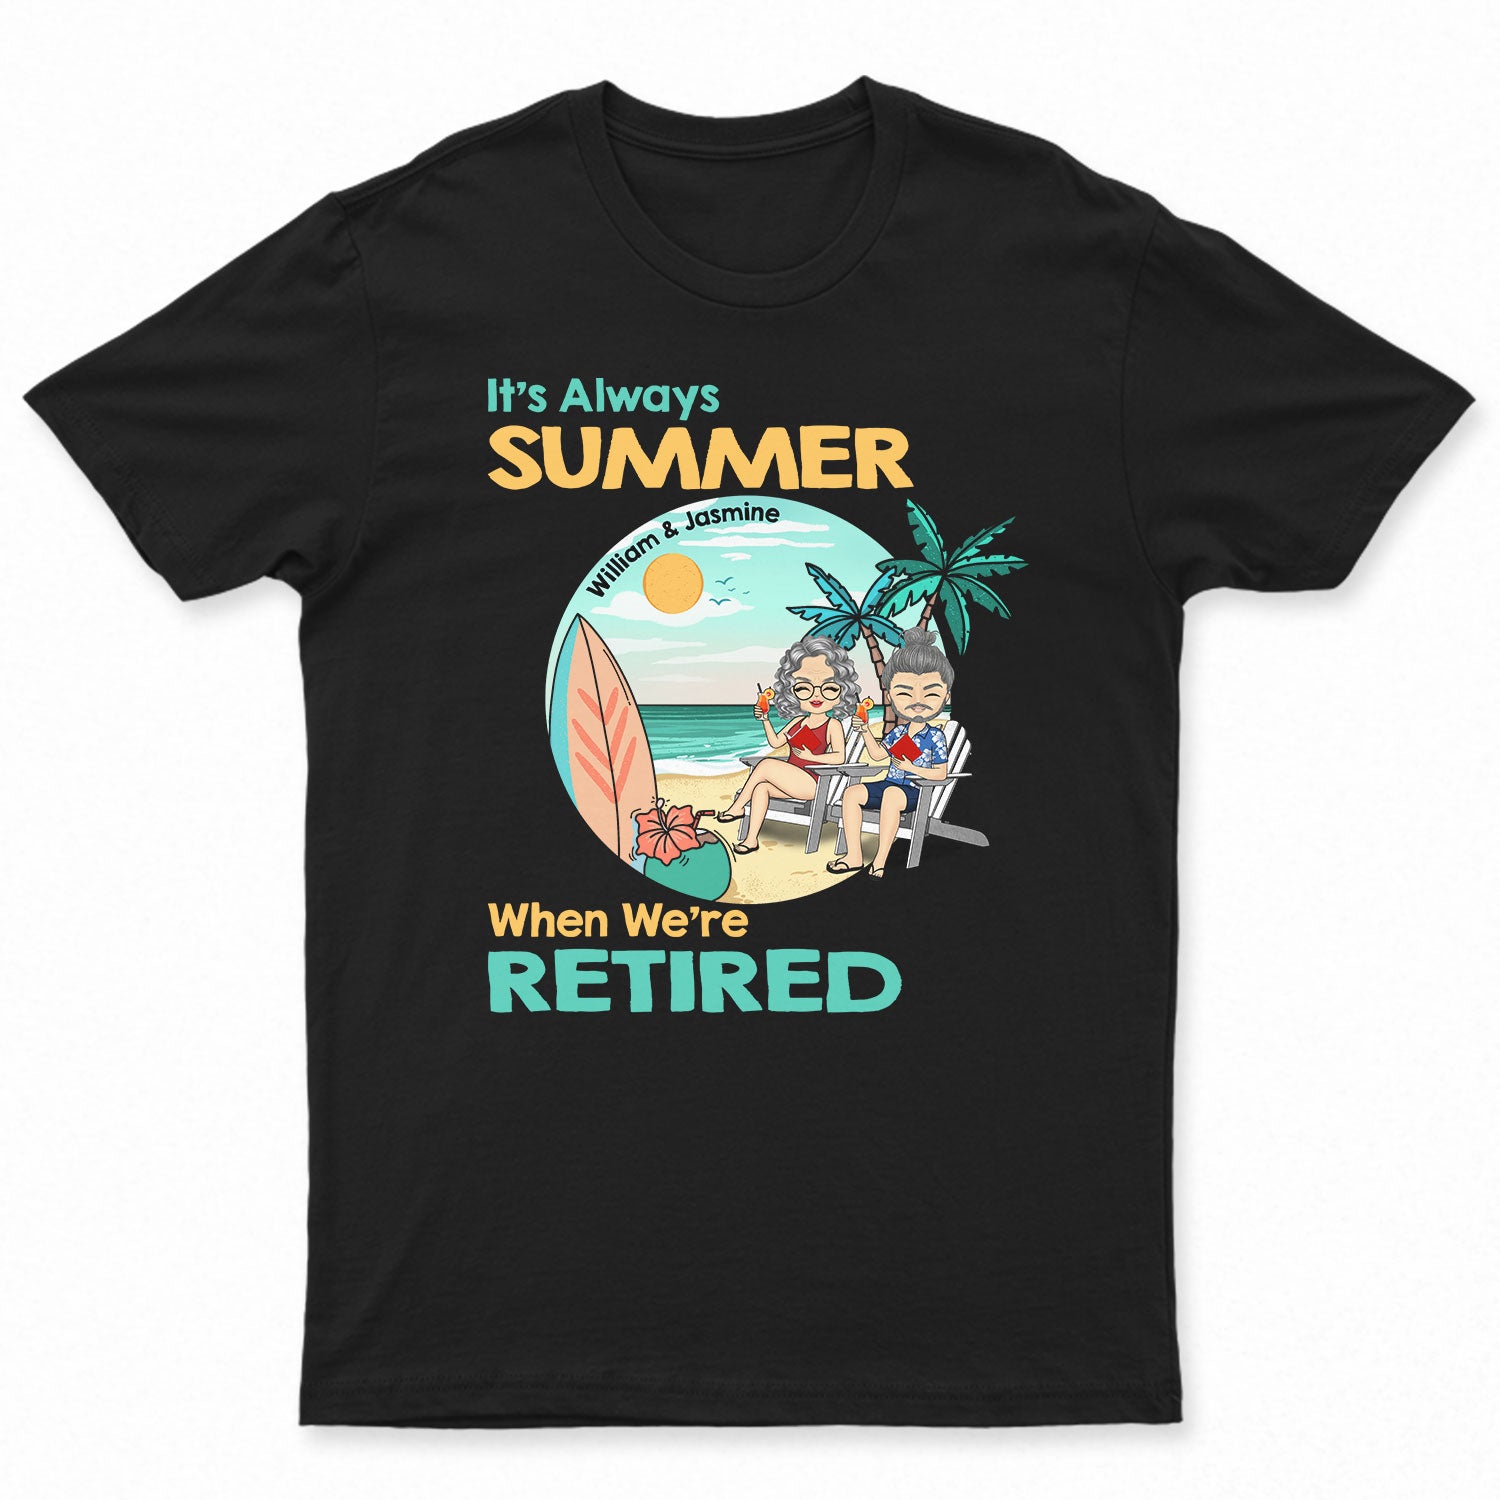 It's Aways Summer Retired - Gift For Couples - Personalized Custom T Shirt